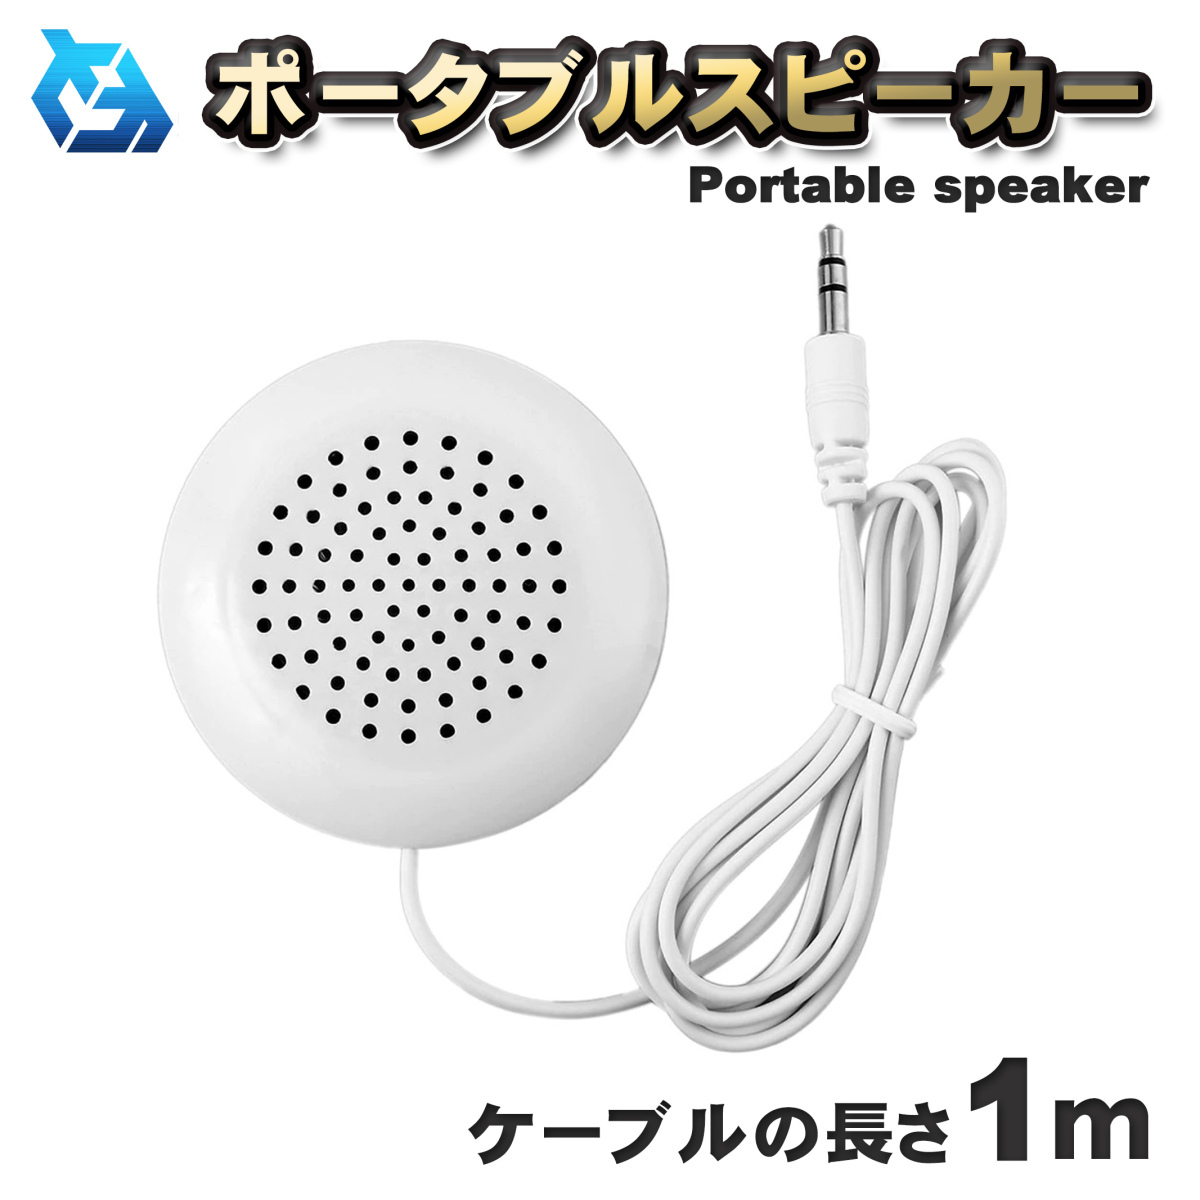  compact Mini portable speaker 3.5mm earphone jack type power supply un- necessary connection make only . use possibility 1 meter [ white ]